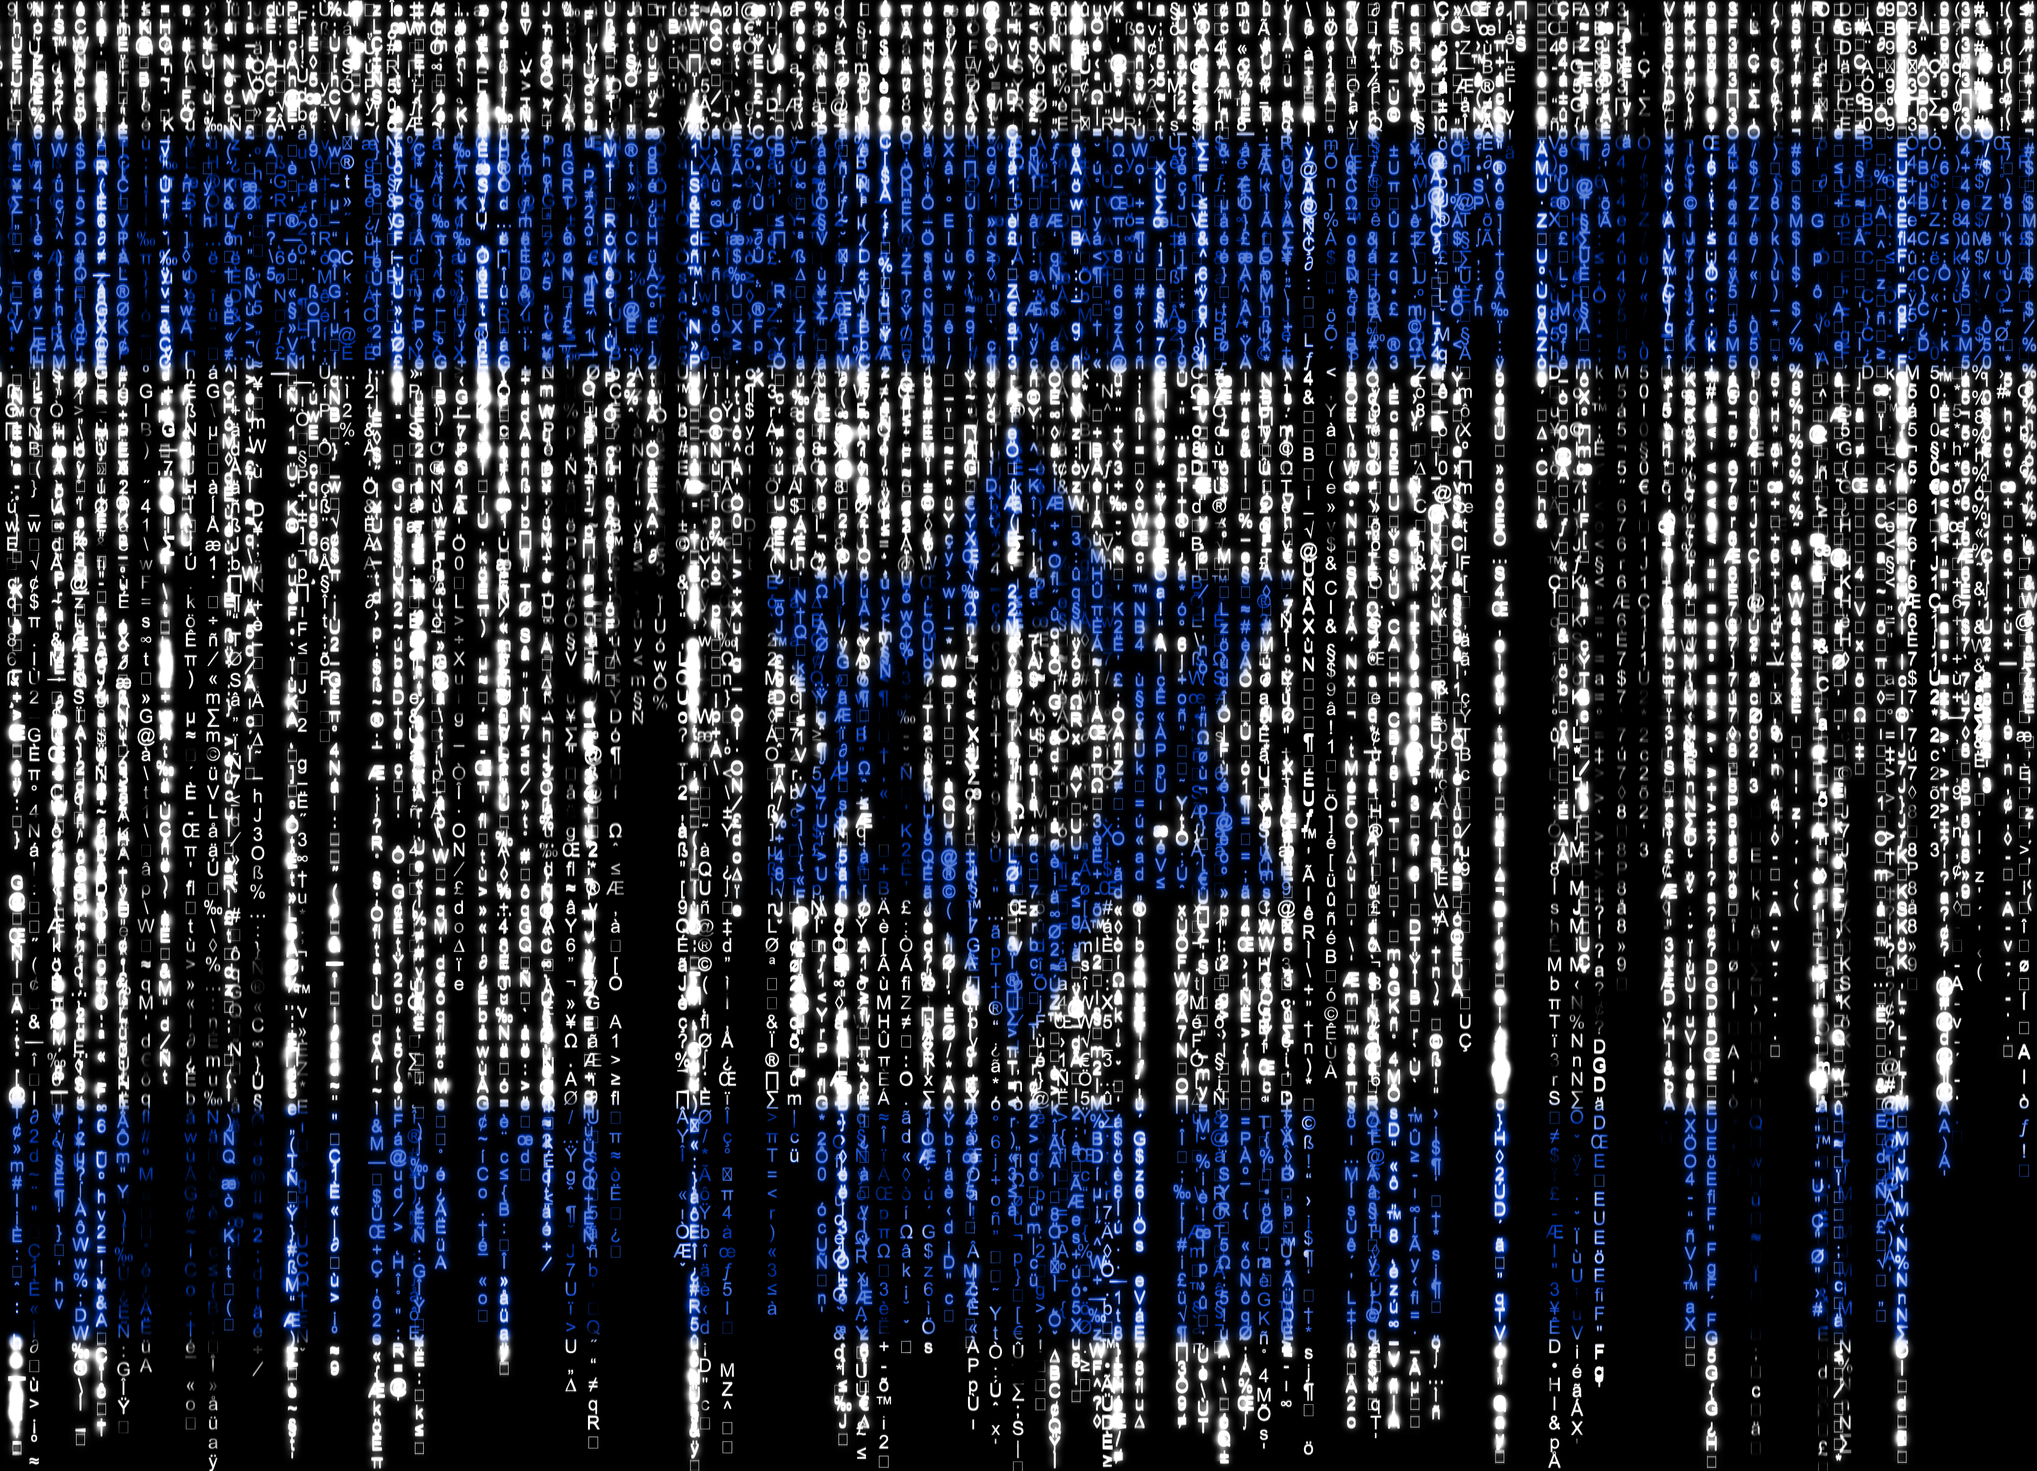 Cyber attackers join fight between Israel and Hamas